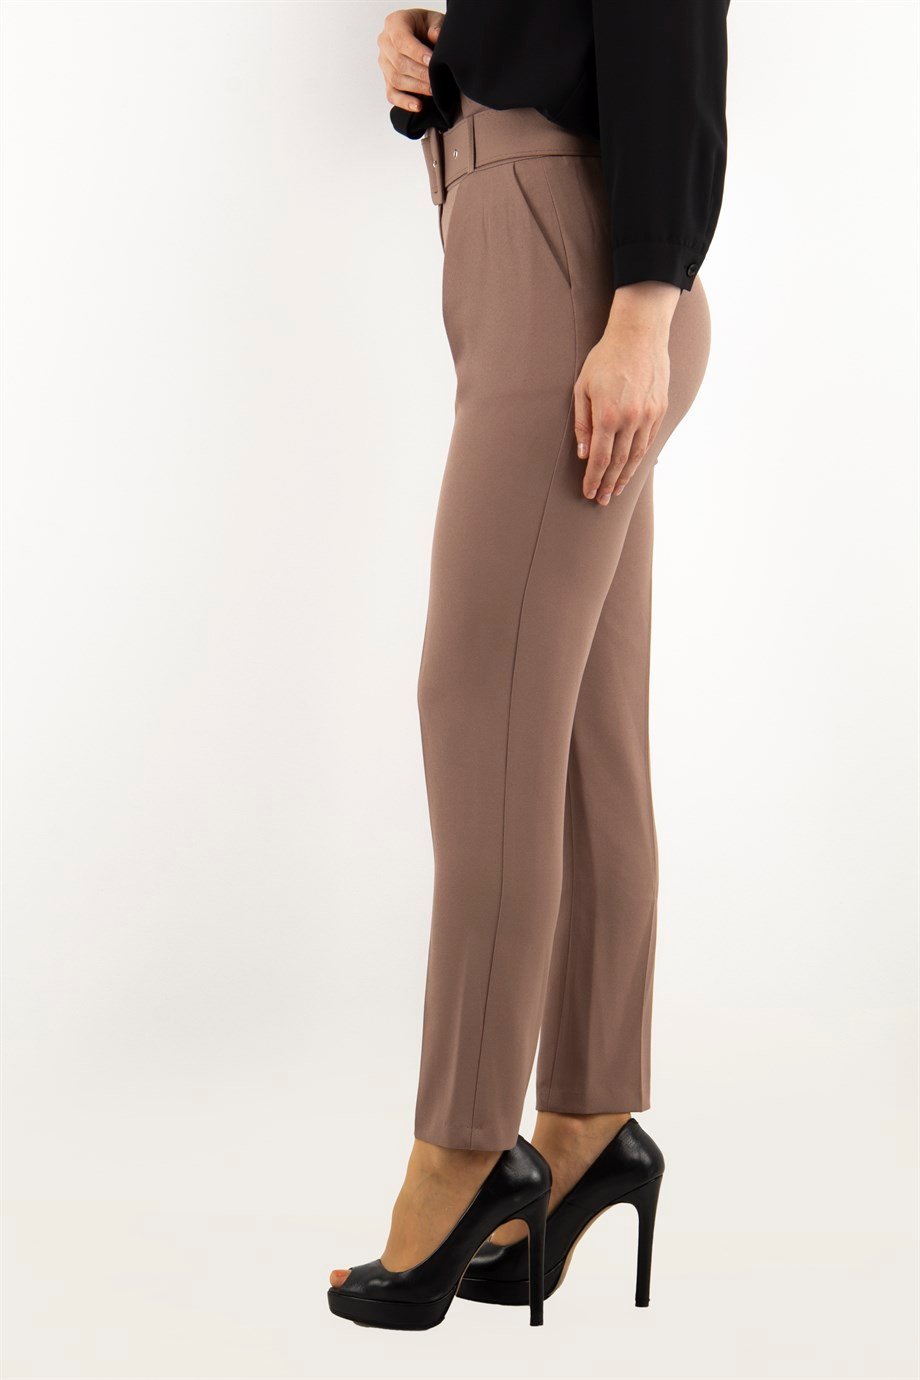 Trousers With Matching Belt Casual Formal Office Pants For Ladies - Mink -  Wholesale Womens Clothing Vendors For Boutiques